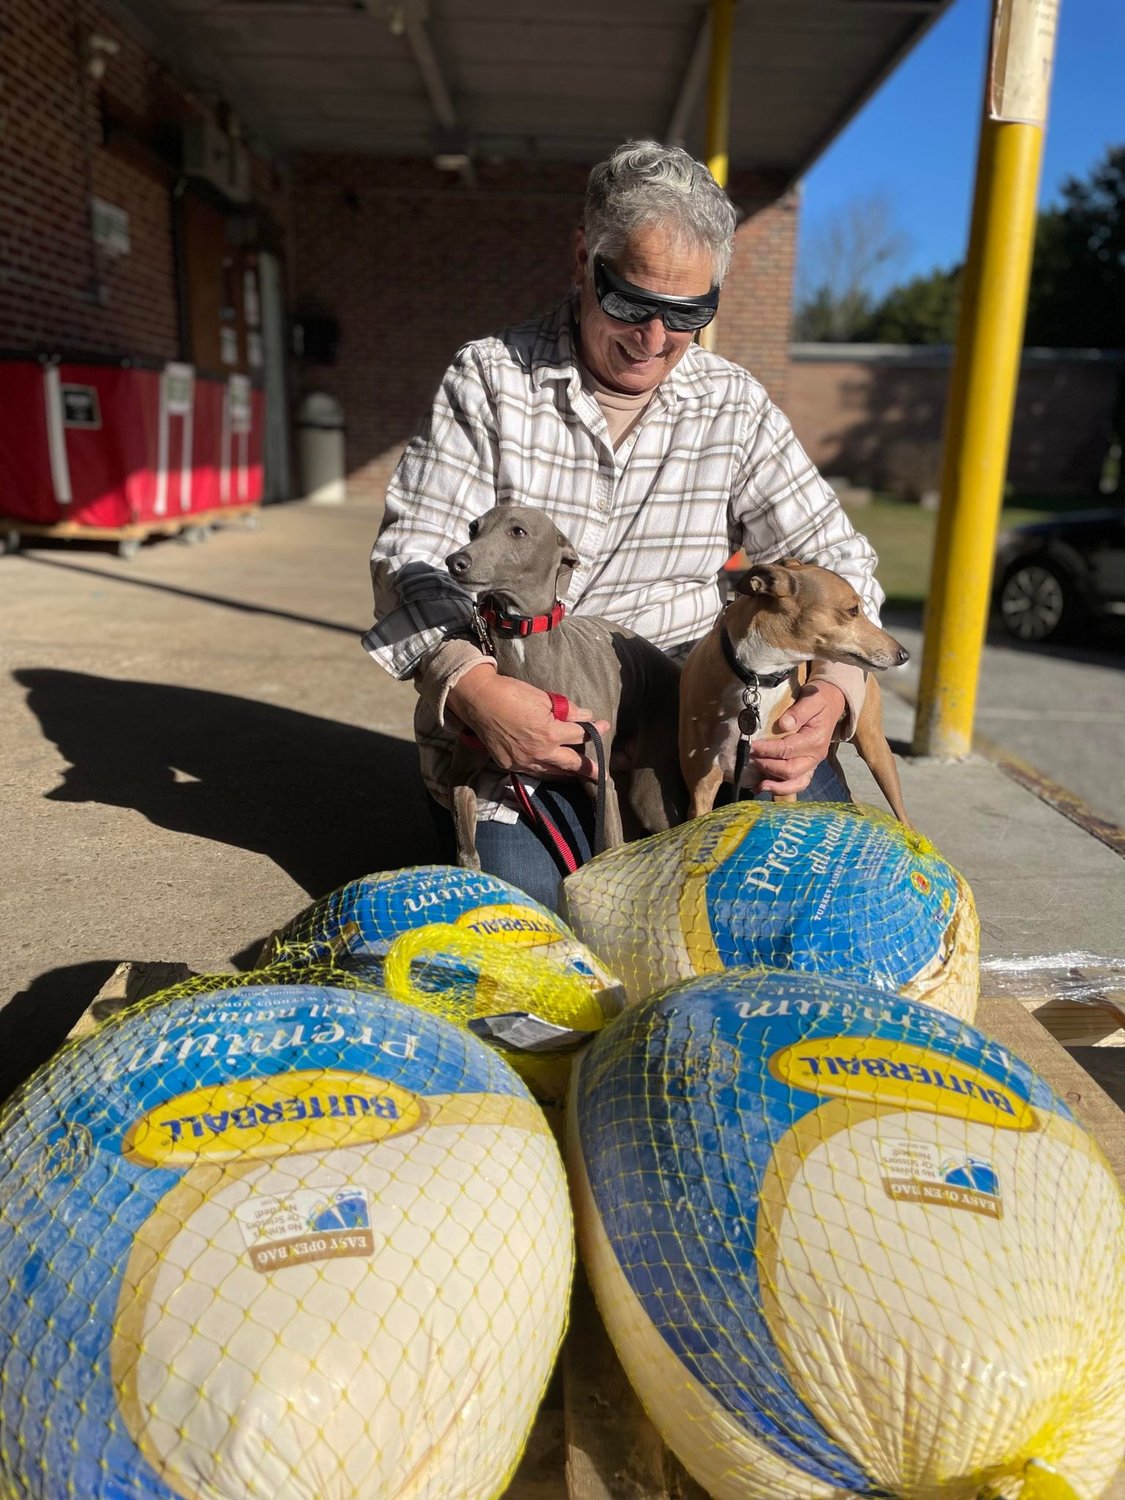 Community members throughout Anne Arundel County are stopping by to drop off turkey, whole chicken, and ham donations to the Anne Arundel County Food Bank.